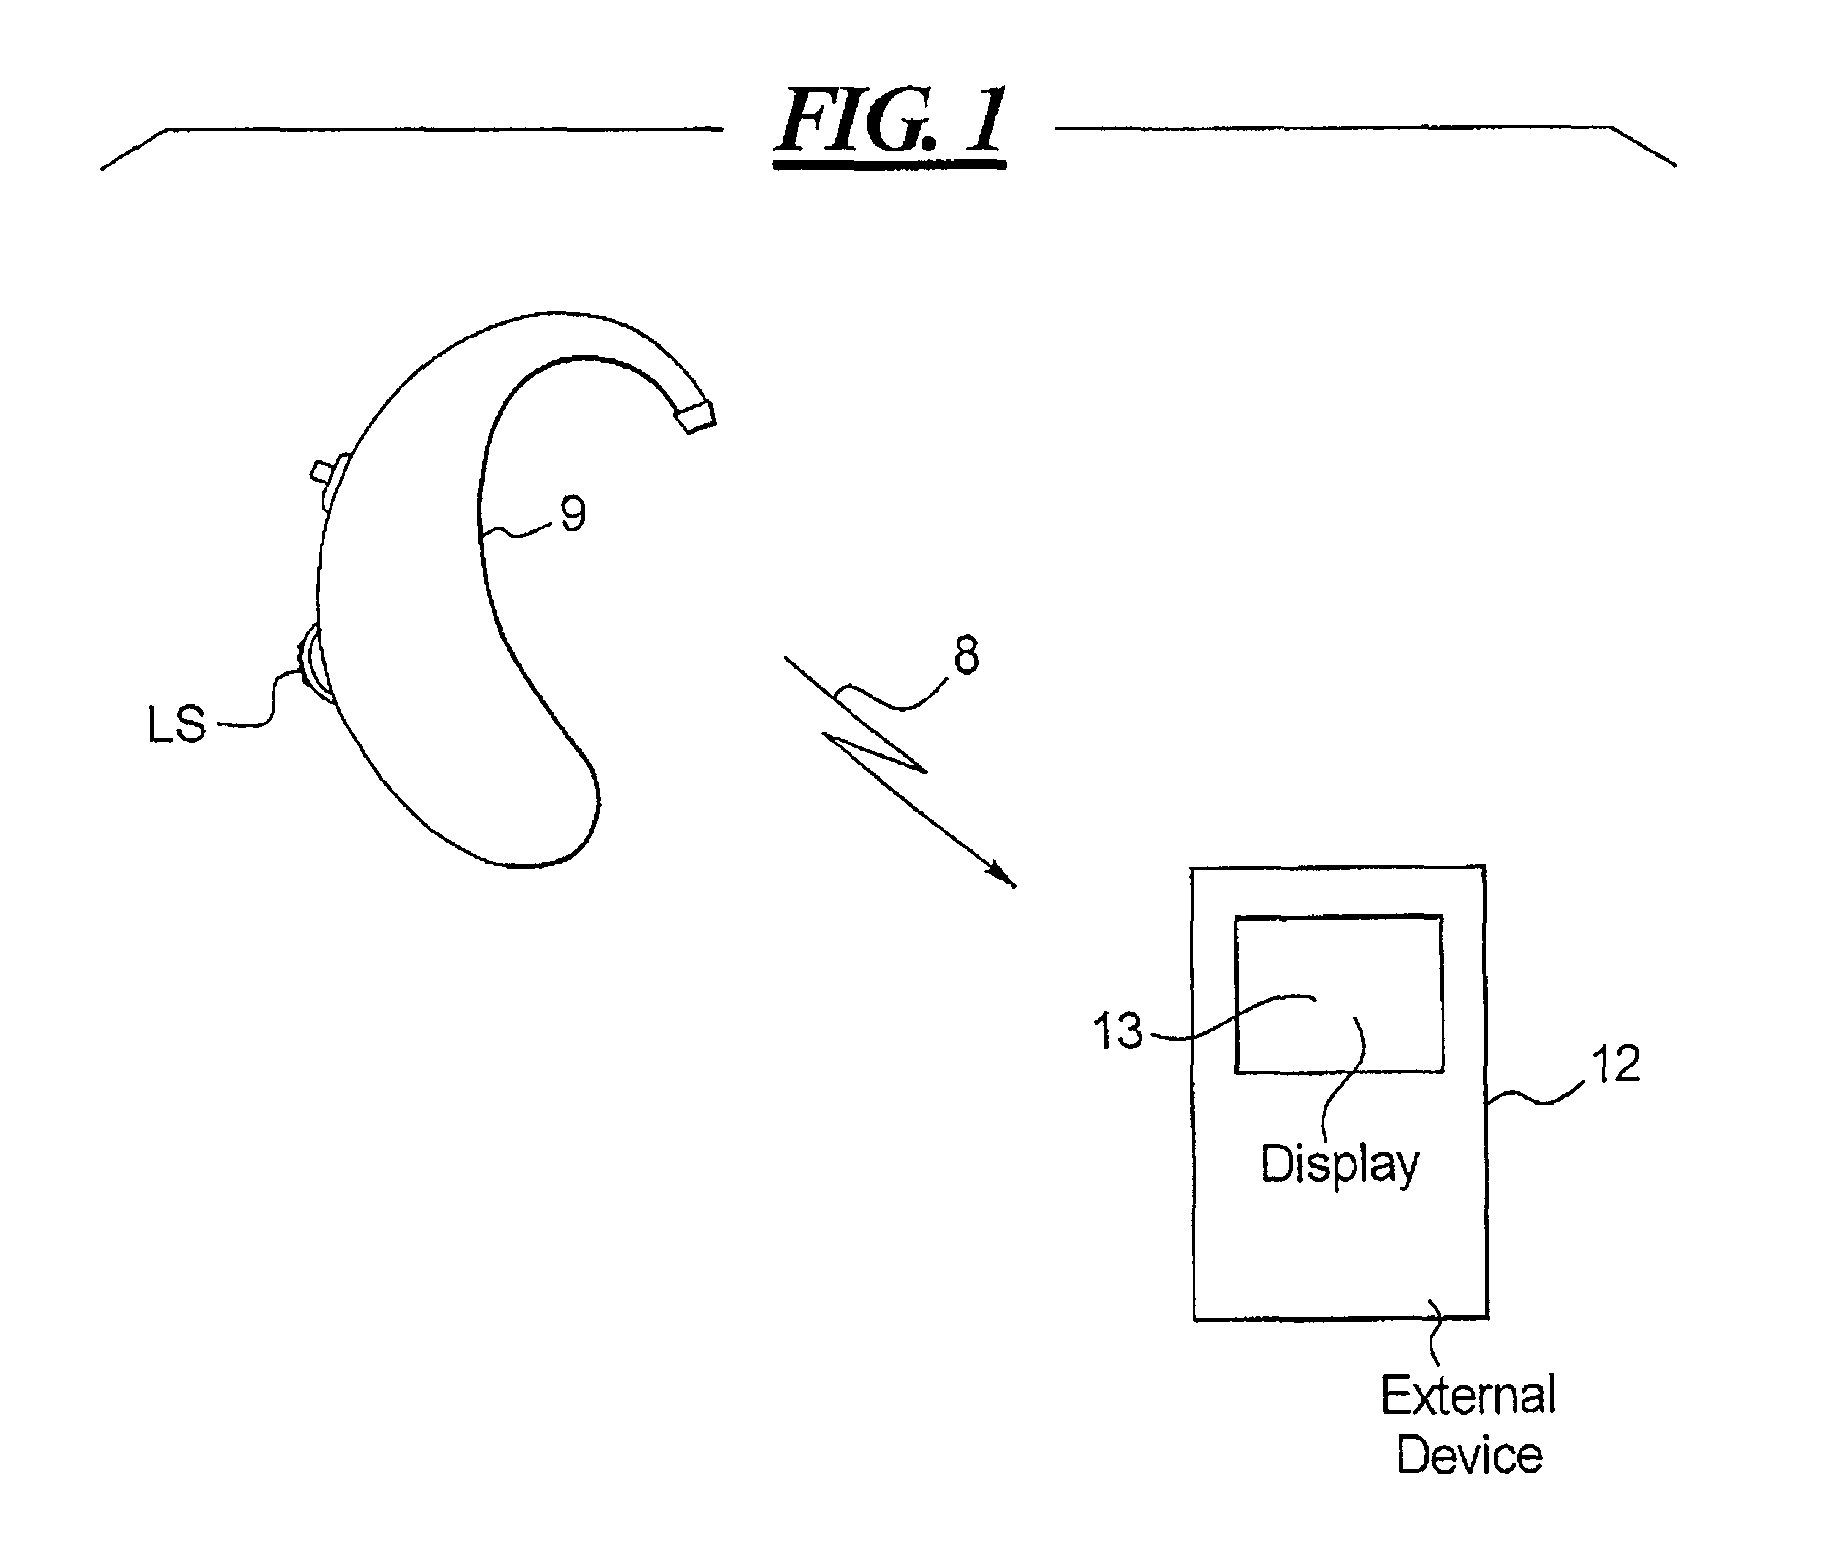 Hearing device and method for monitoring the hearing ability of a person with impaired hearing